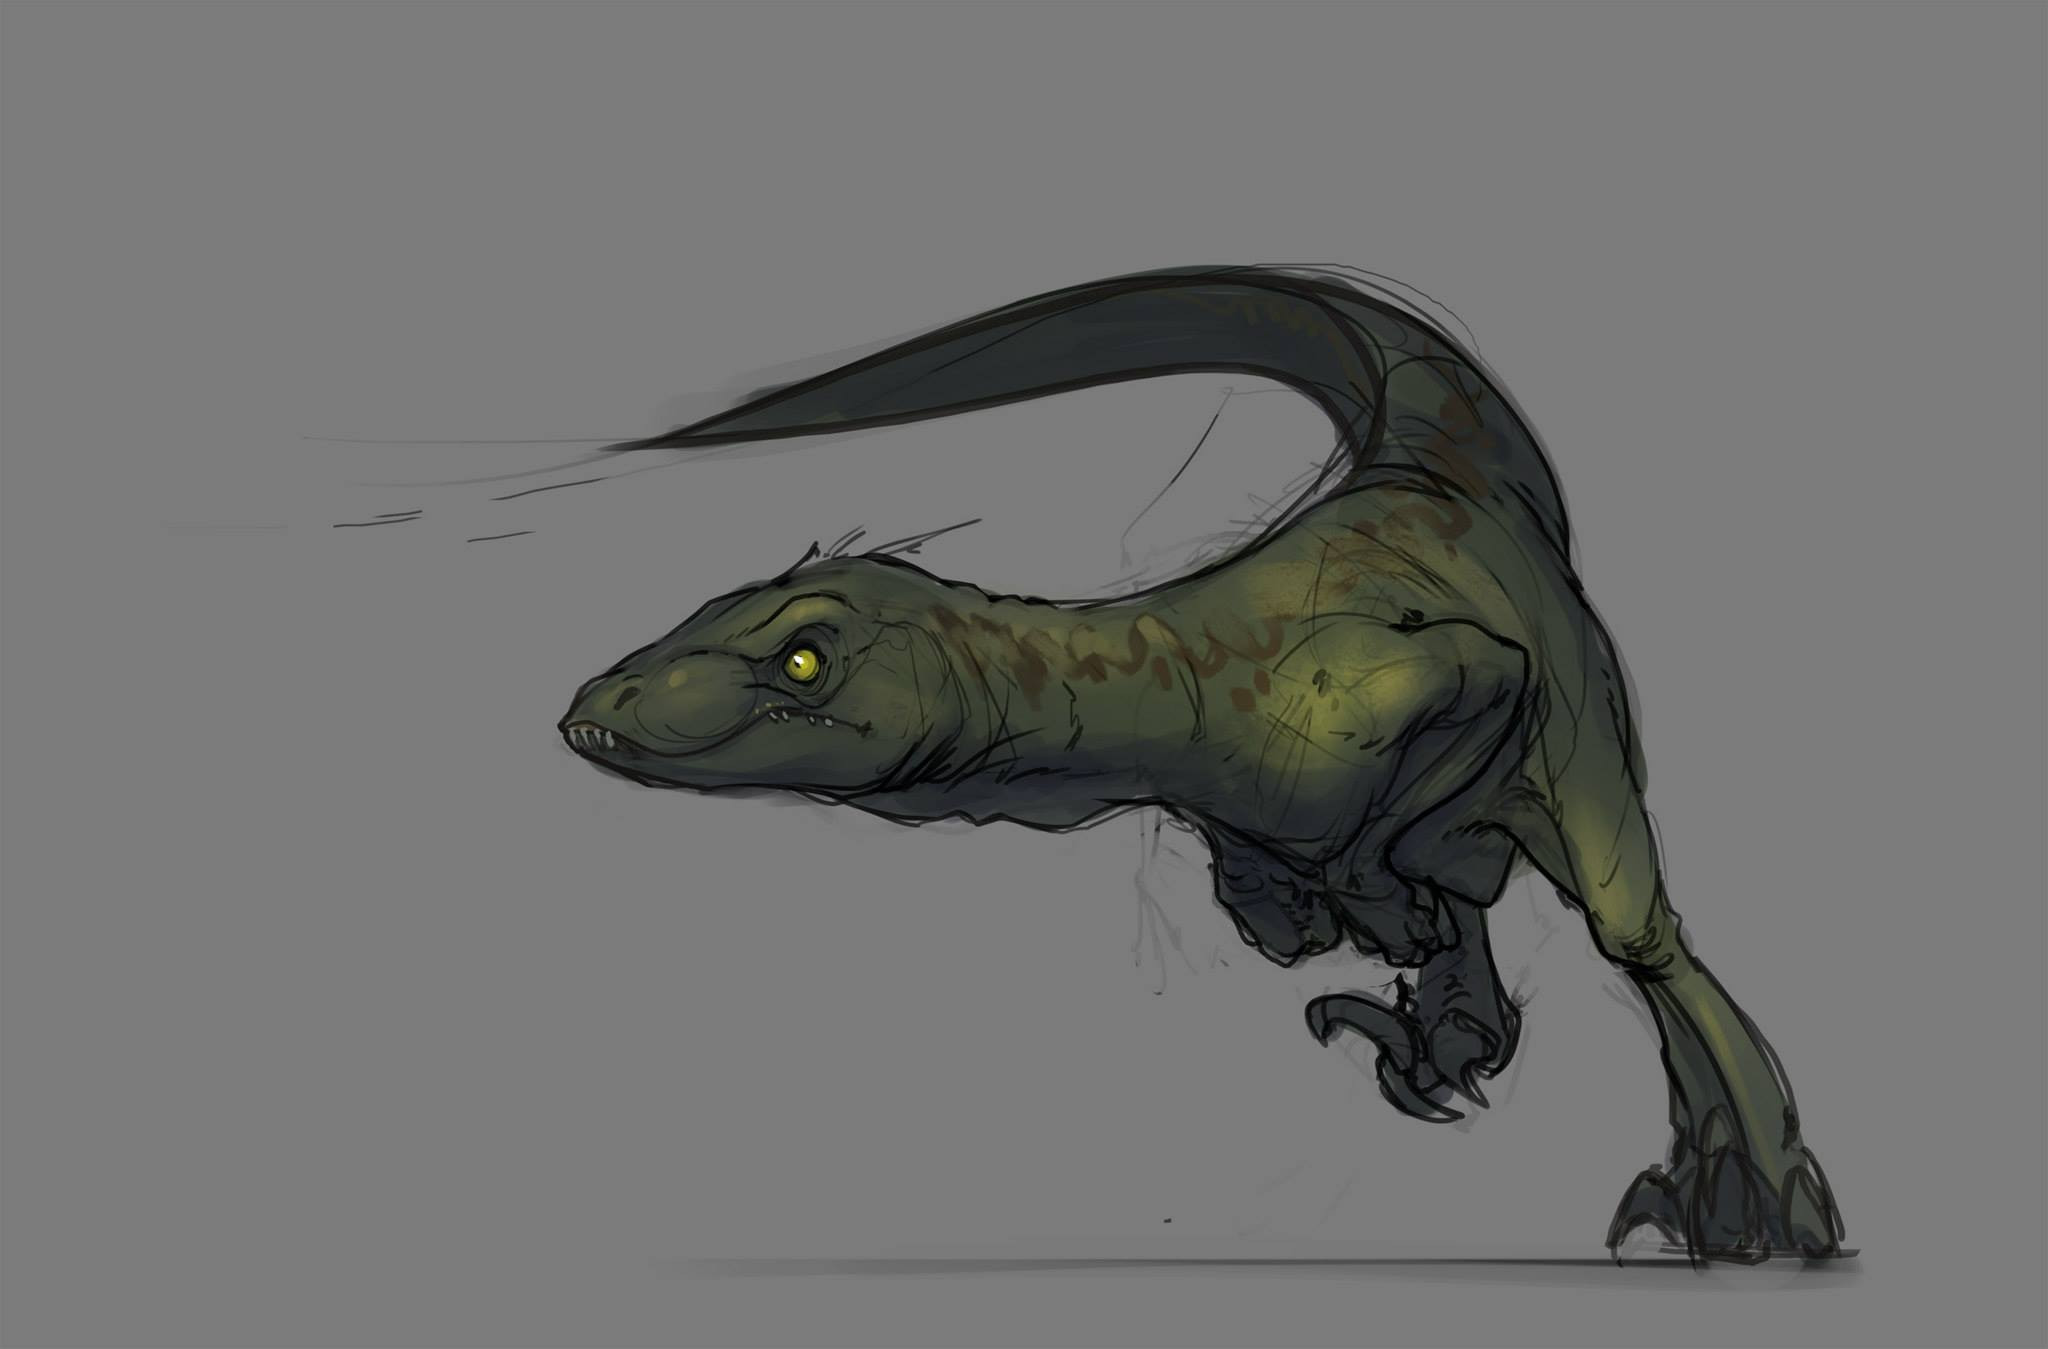 The underlying sketch preparing for the final illustration. I'd never done a dinosaur before so it involved a lot of reference and doodles before this sketch and the following final image.